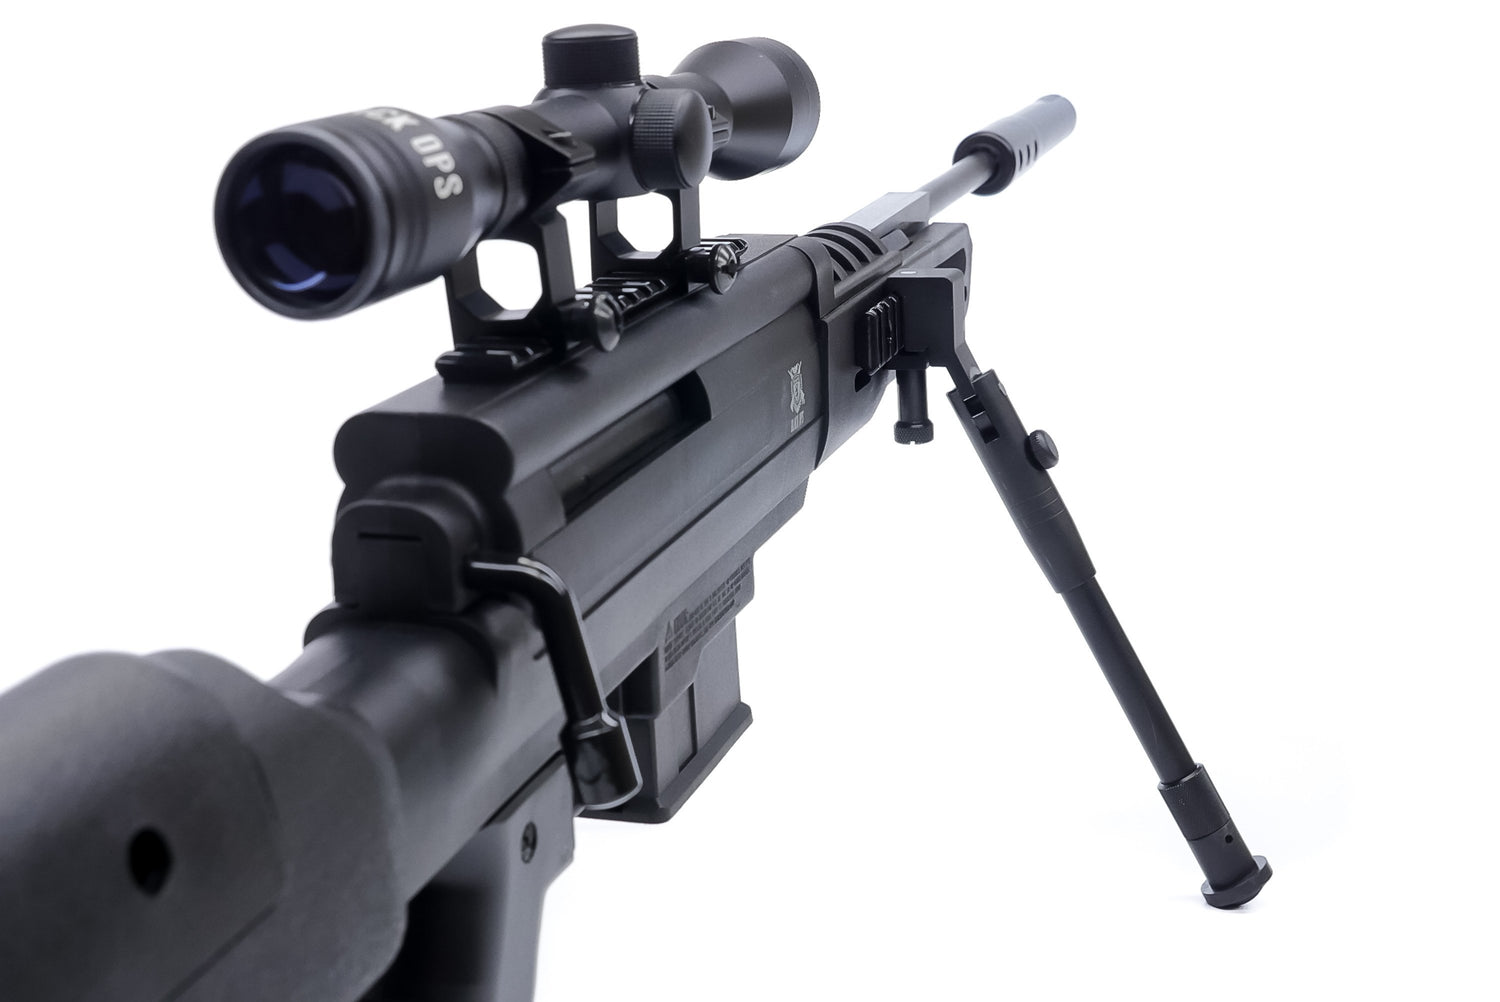 Airsoft Sniper Rifle with Scope and Bipod - Black Ops – Barra Airguns